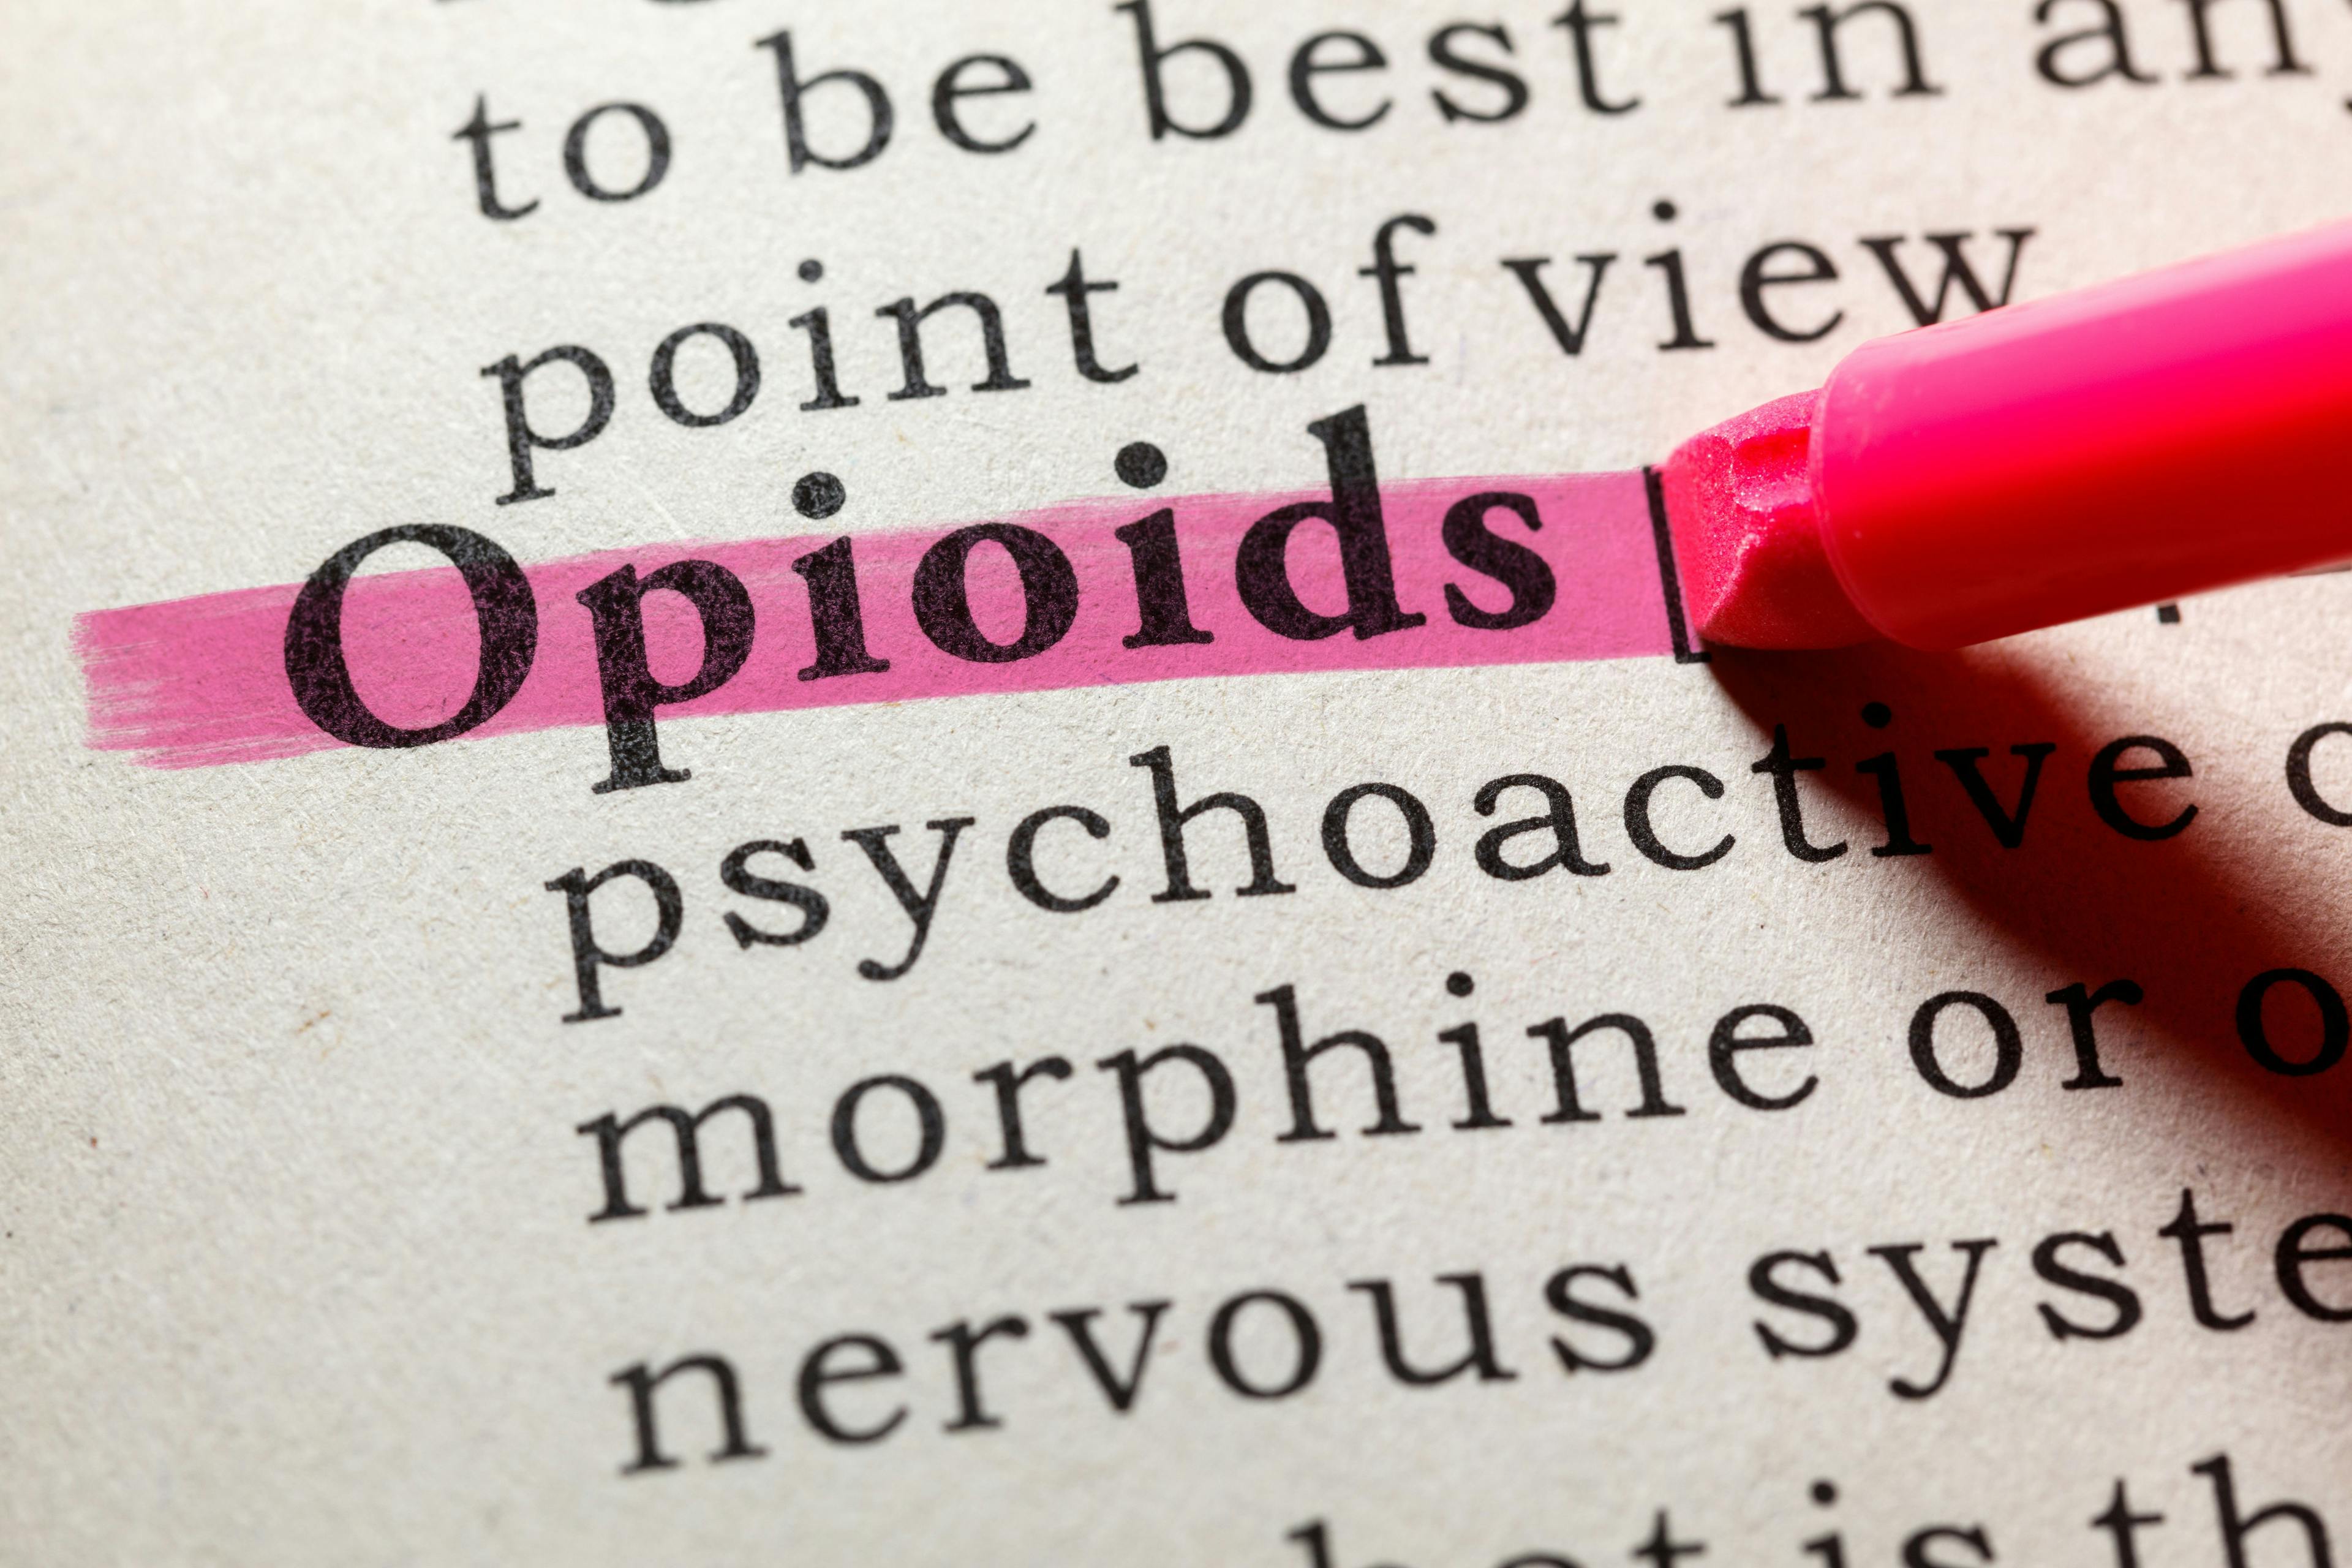 definition of opioids | Image Credit: Feng Yu - stock.adobe.com